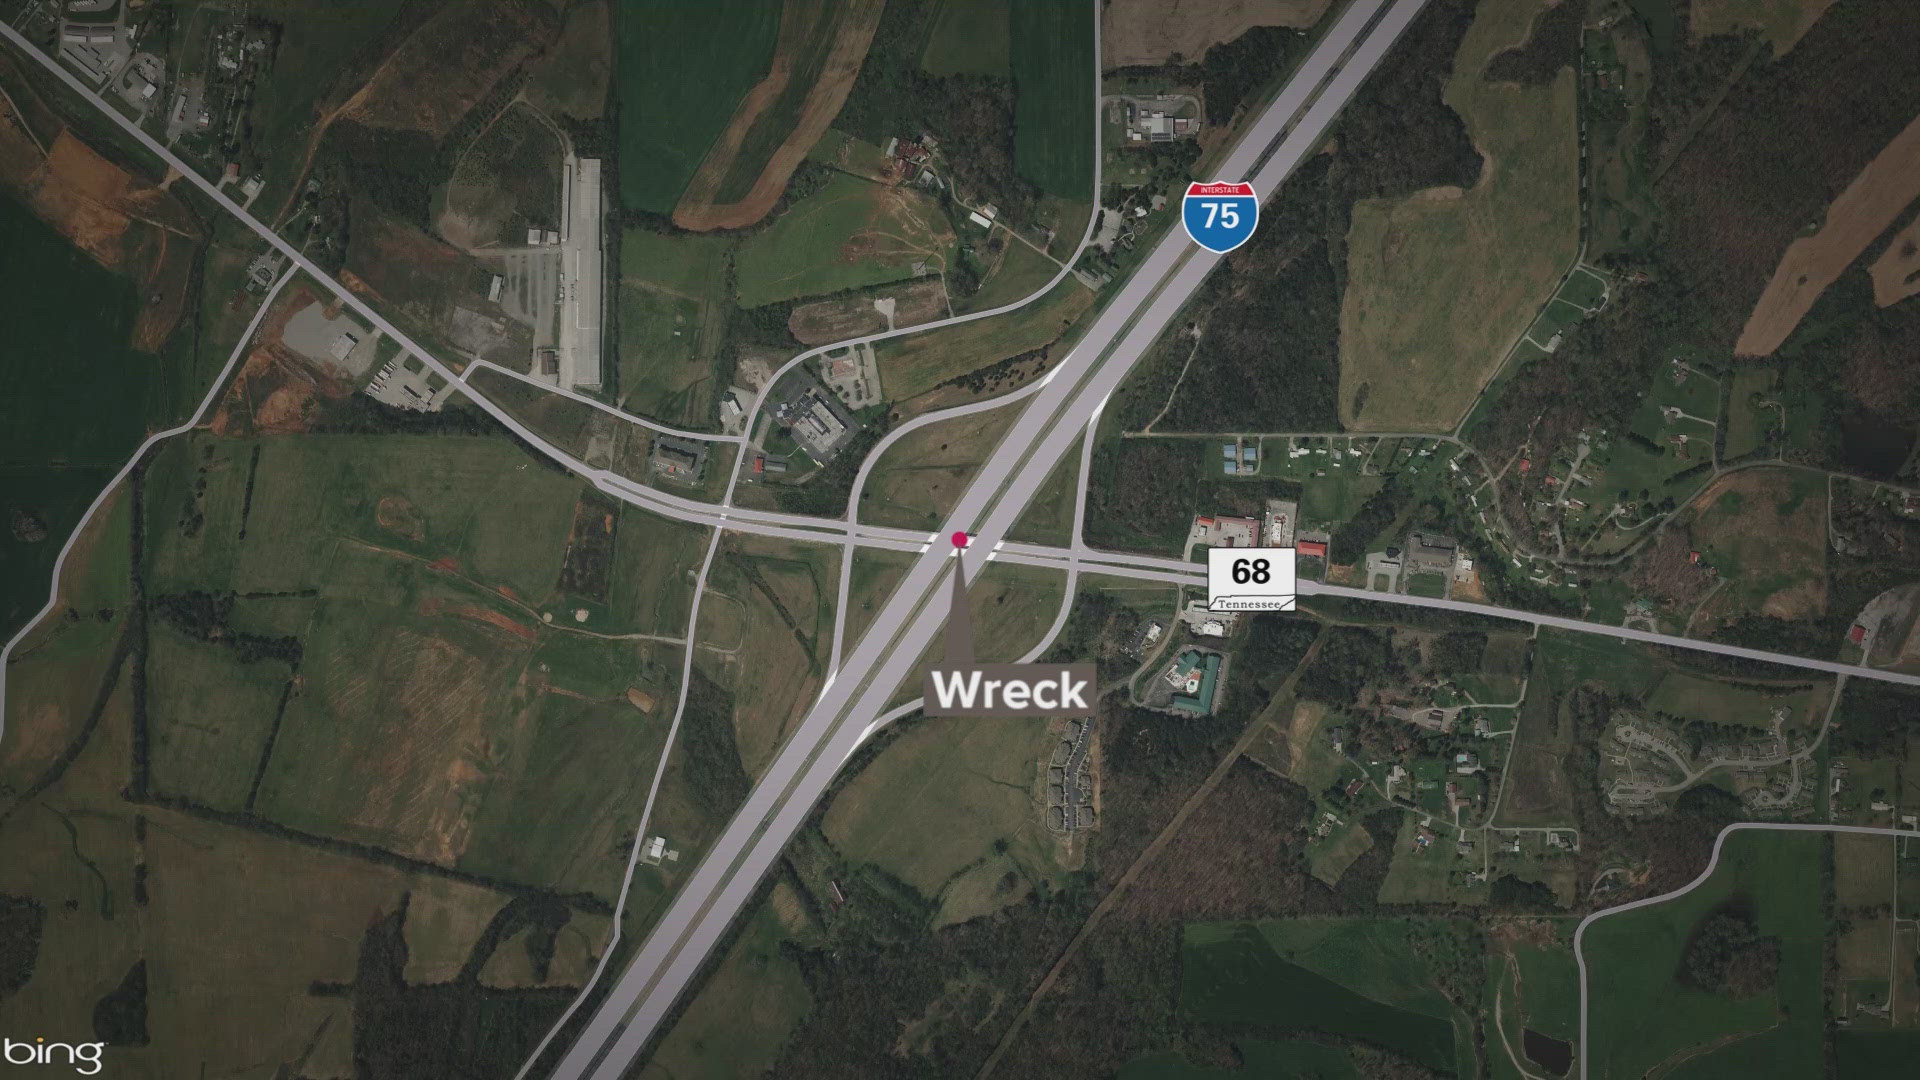 The crash was reported near the Sweetwater exit. 10News has reached out to the Tennessee Highway Patrol for a report.